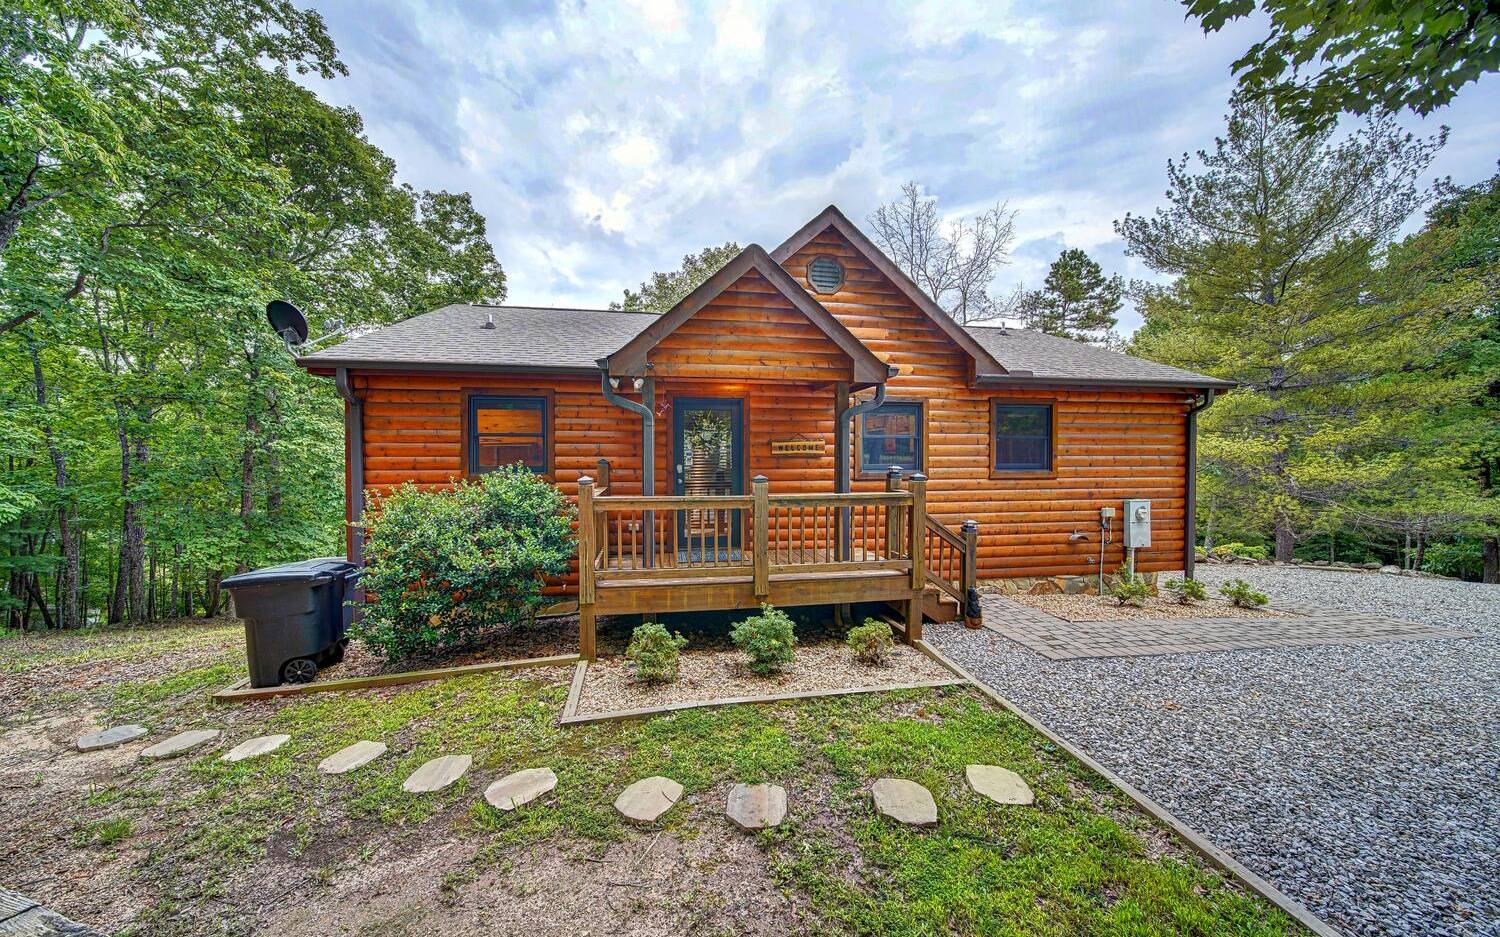 This 3BD/3.5BA cabin is a Turn-Key successful Vacation Cabin Rental/Part time Owner Residence. Split master bedrooms and Laundry on main level!! Make this your full time or vacation cabin. Easy access on paved roads and located conveniently between Blue Ridge and Blairsville. Finished Basement with Family Room, Bedroom/Full Bath and Workshop/Storage area. The cabin has whole house water filter system, large designer hot tub and security cameras. Property has level parking for several cars. All this PLUS a Seasonal Mountain View! Brand New HVAC, Kitchen Stove & Hot Tub.